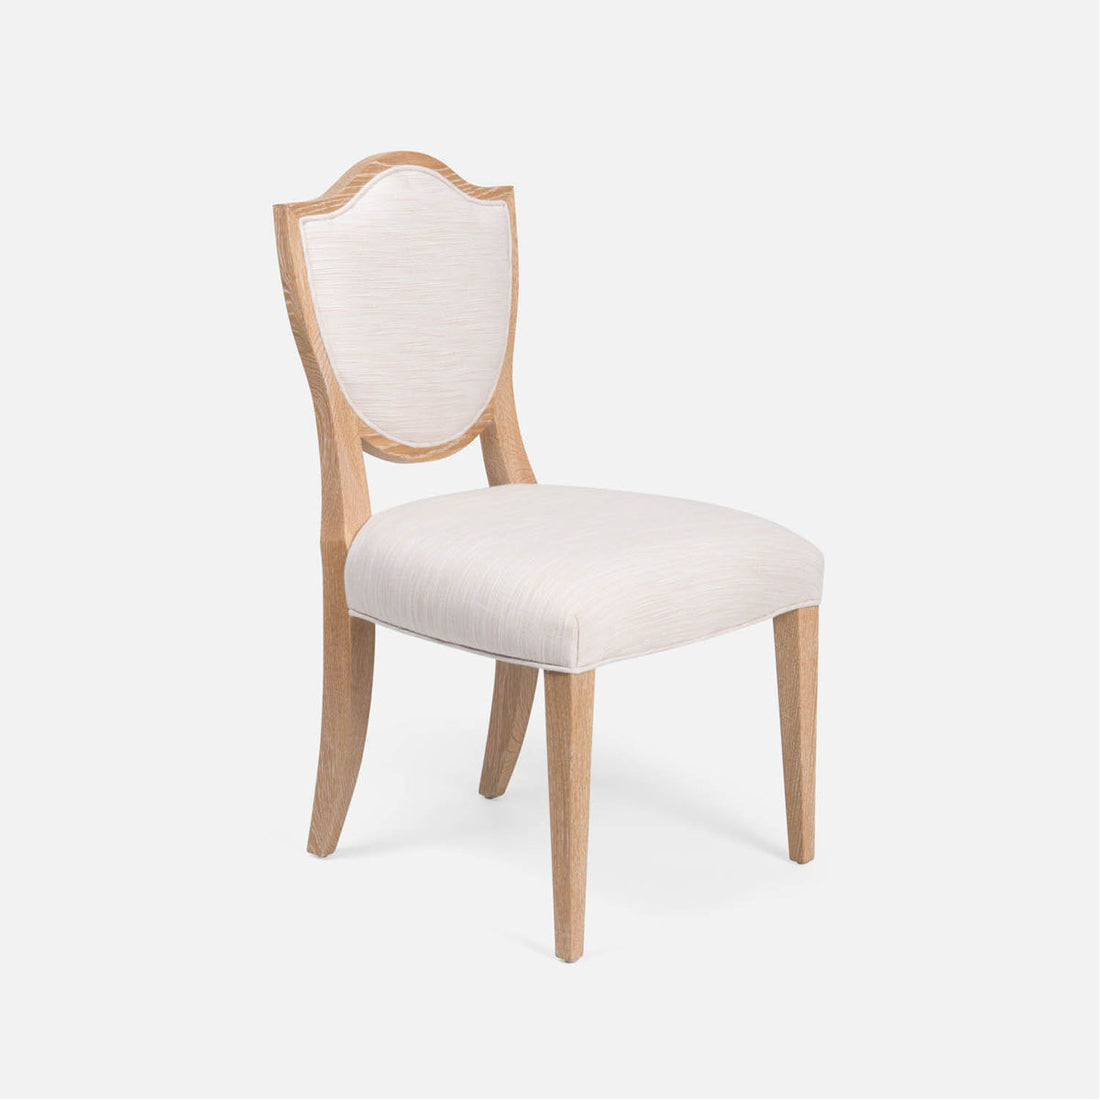 Made Goods Micah Upholstered Medallion Dining Chair in Rhone Leather